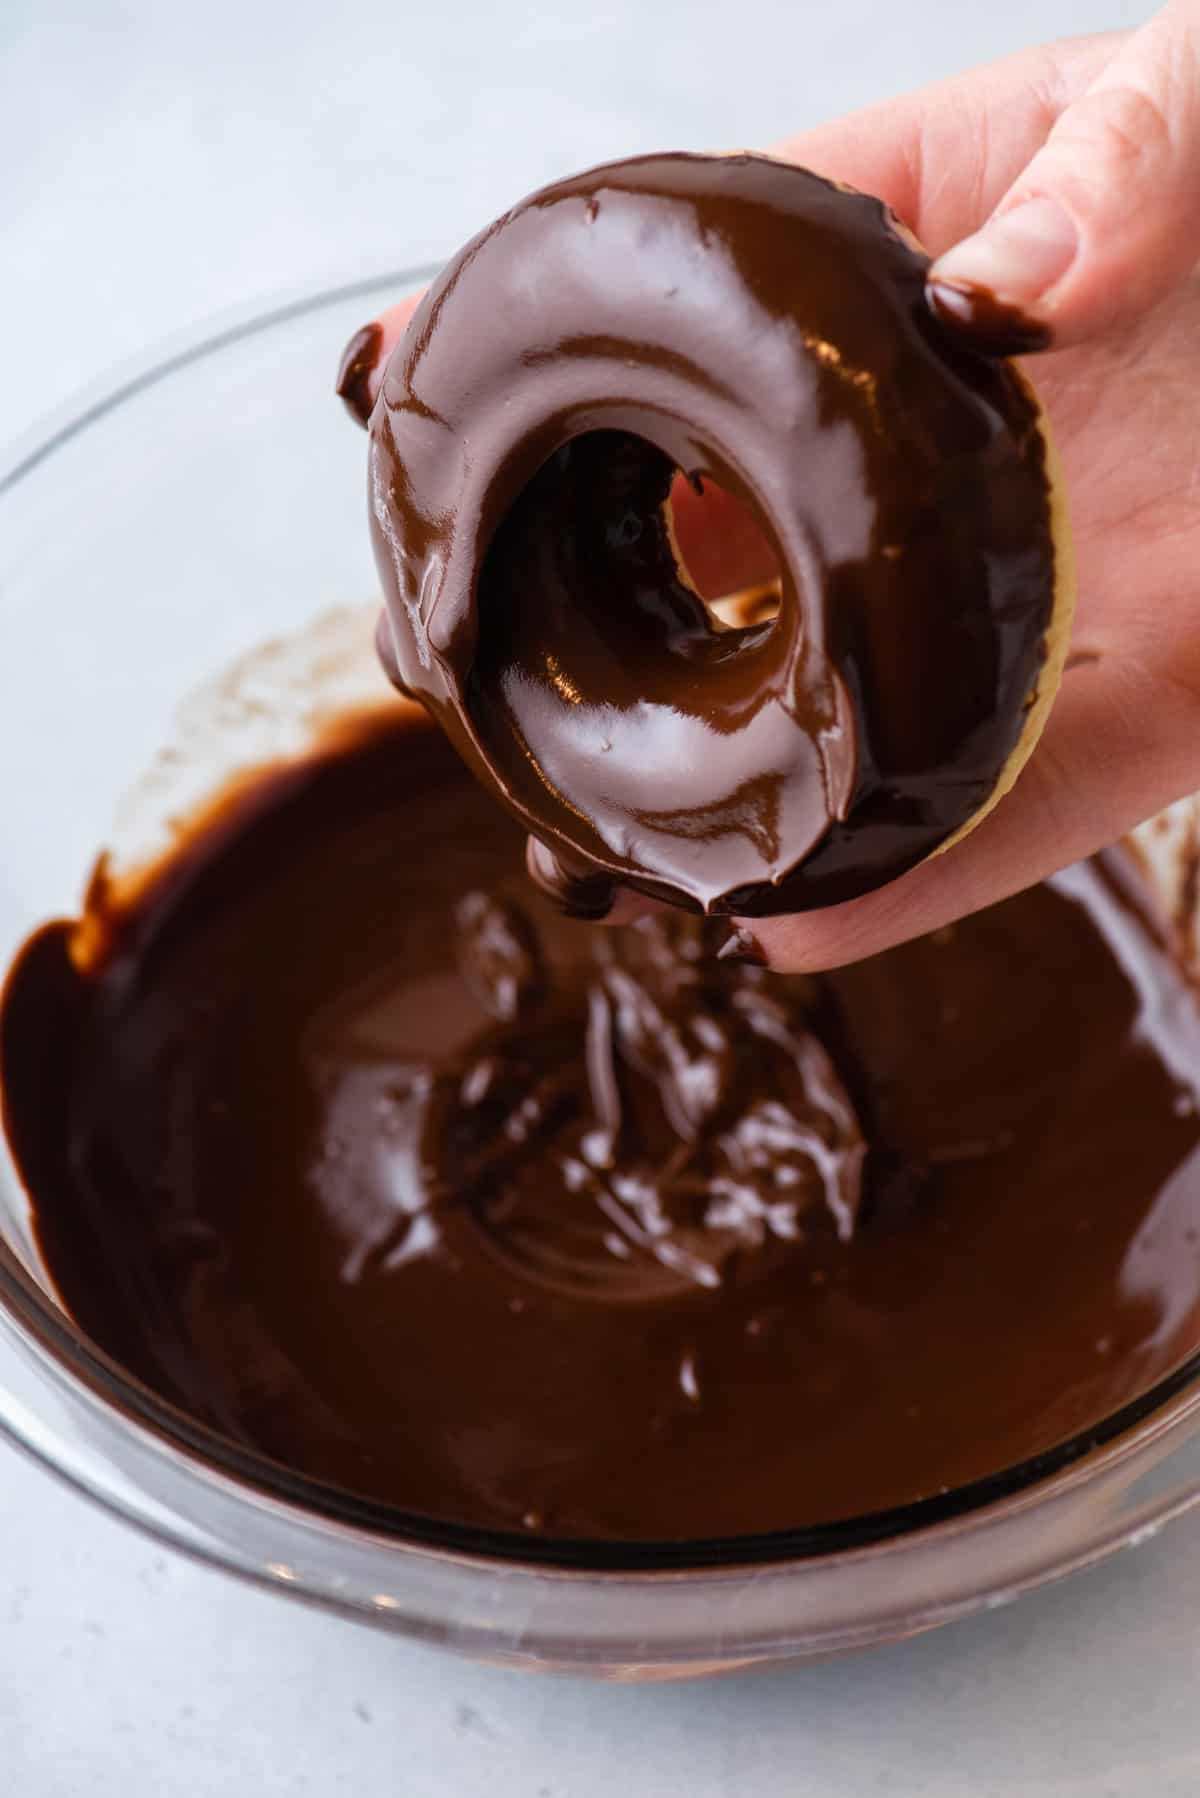 A hand dipping a donut into chocolate glaze